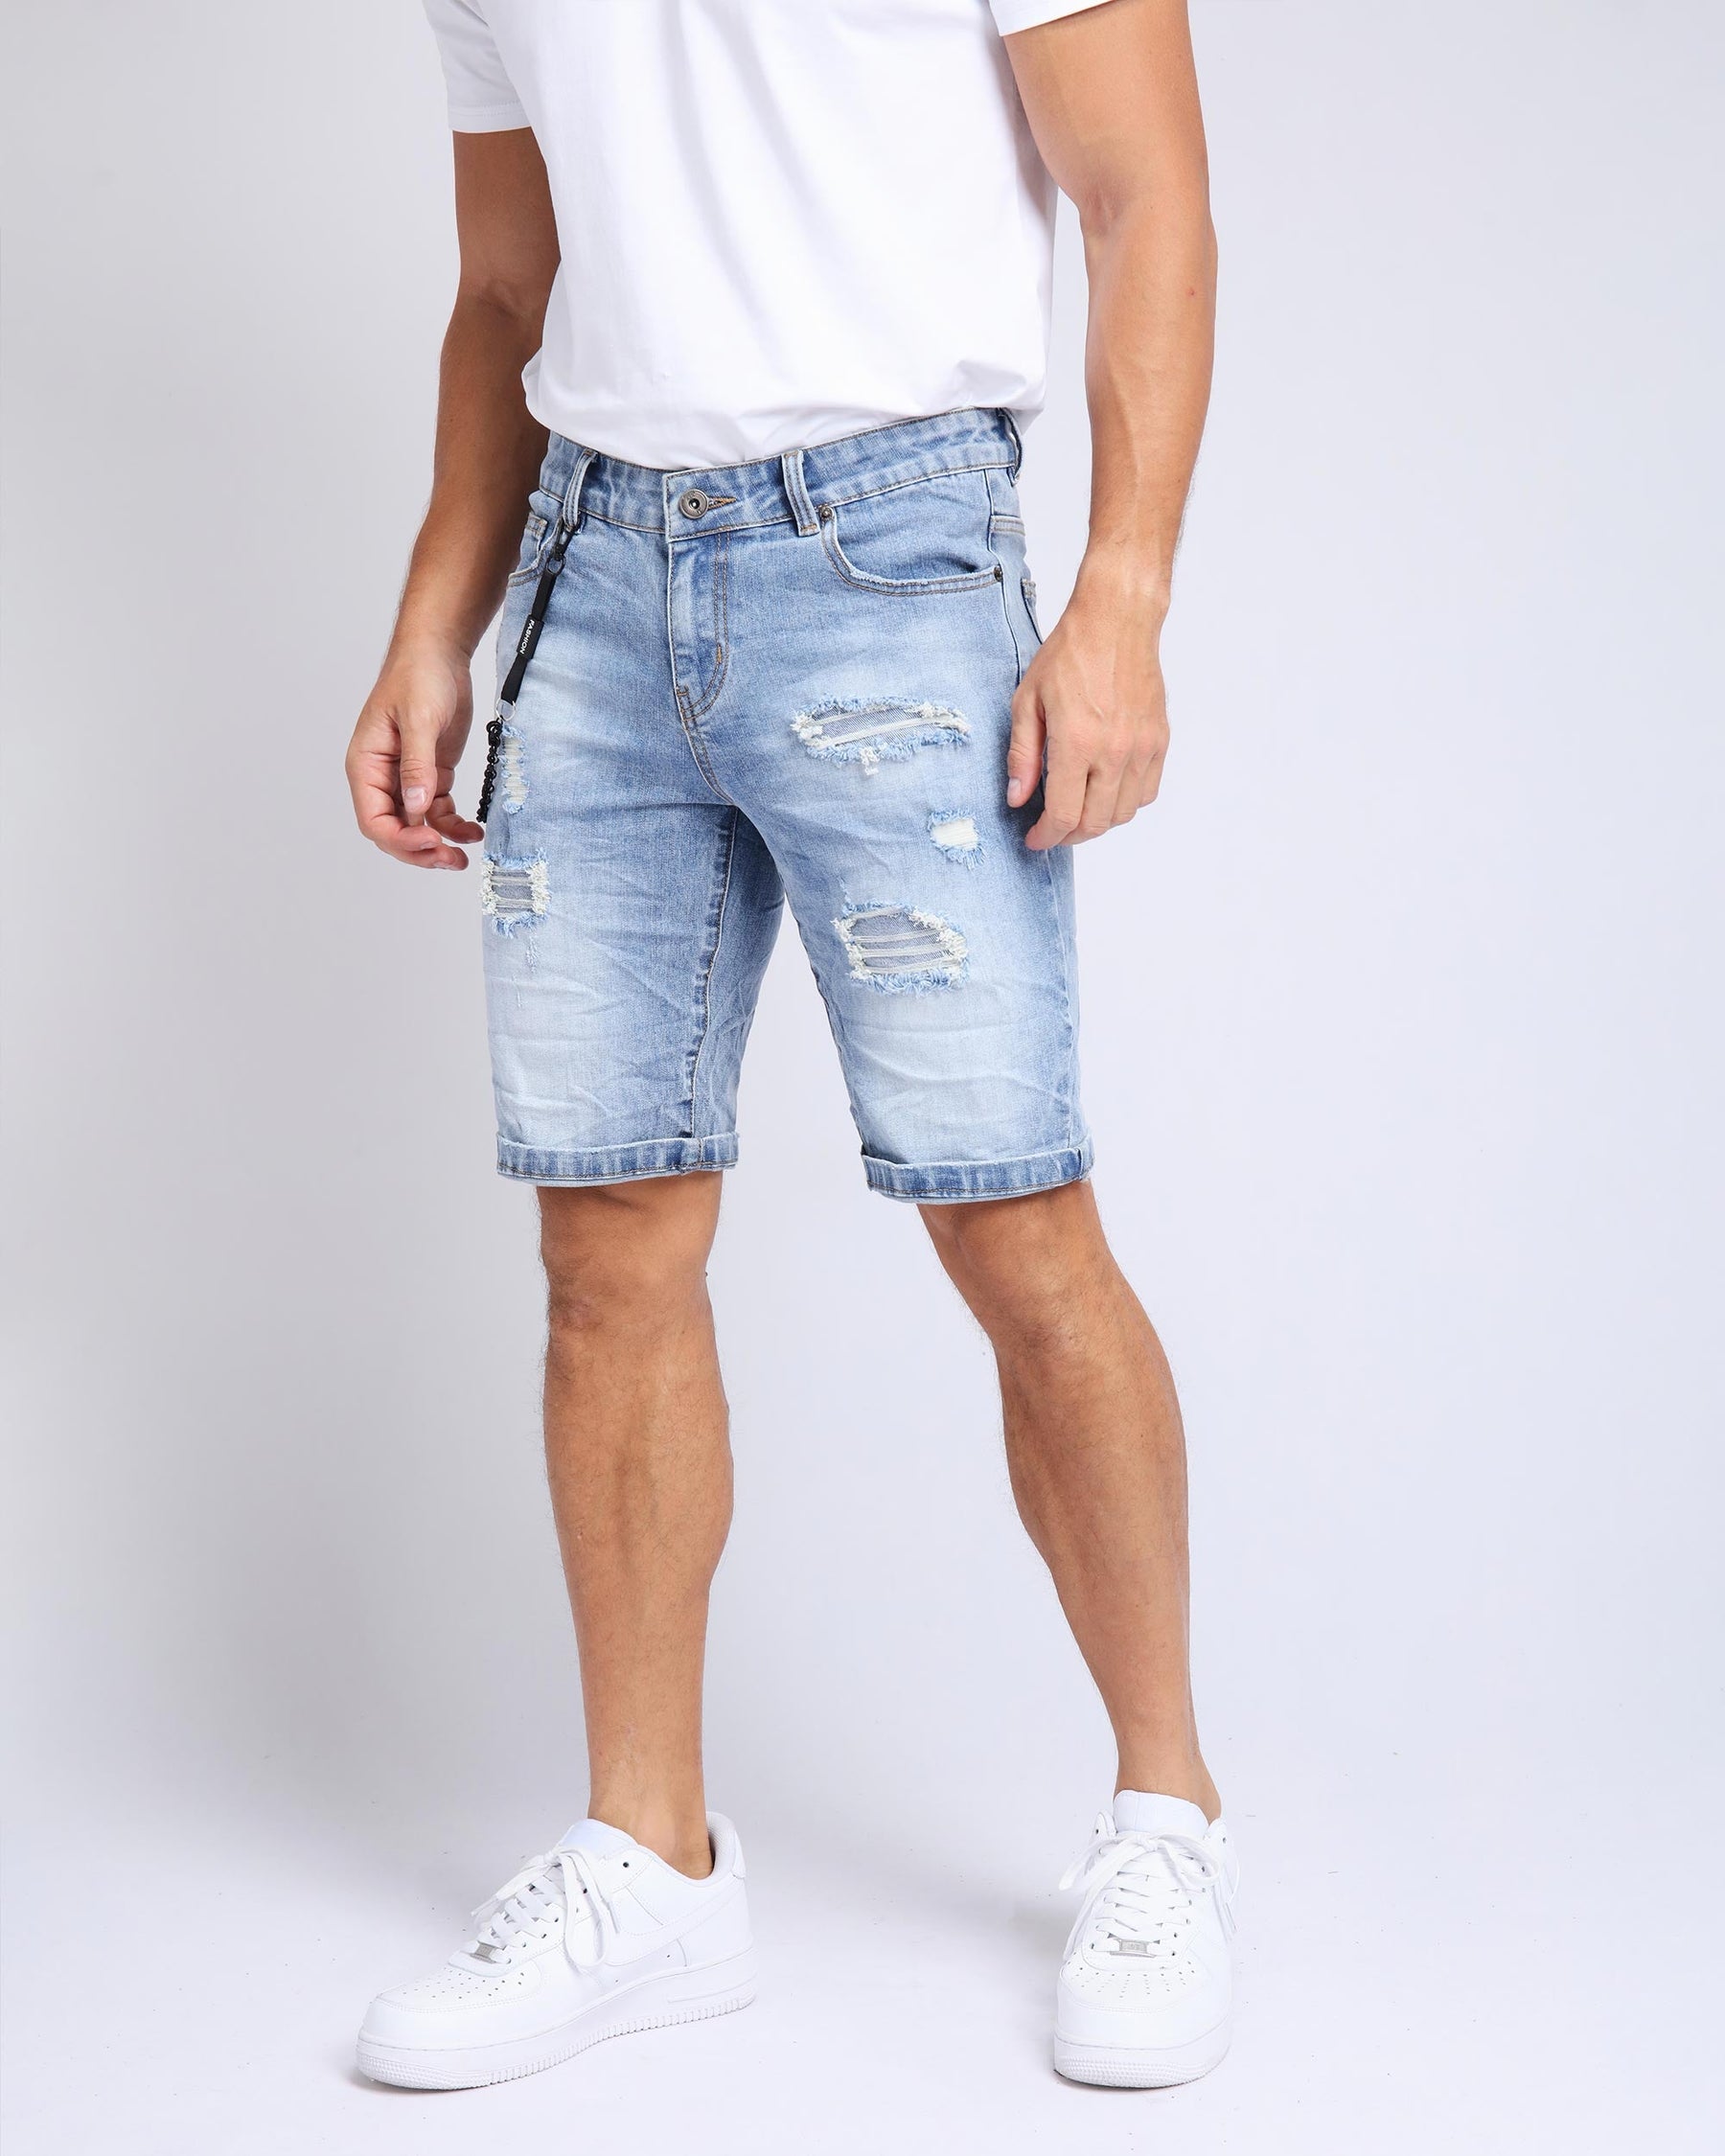 LOGEQI Summer Casual Blue Ripped Jeans Shorts